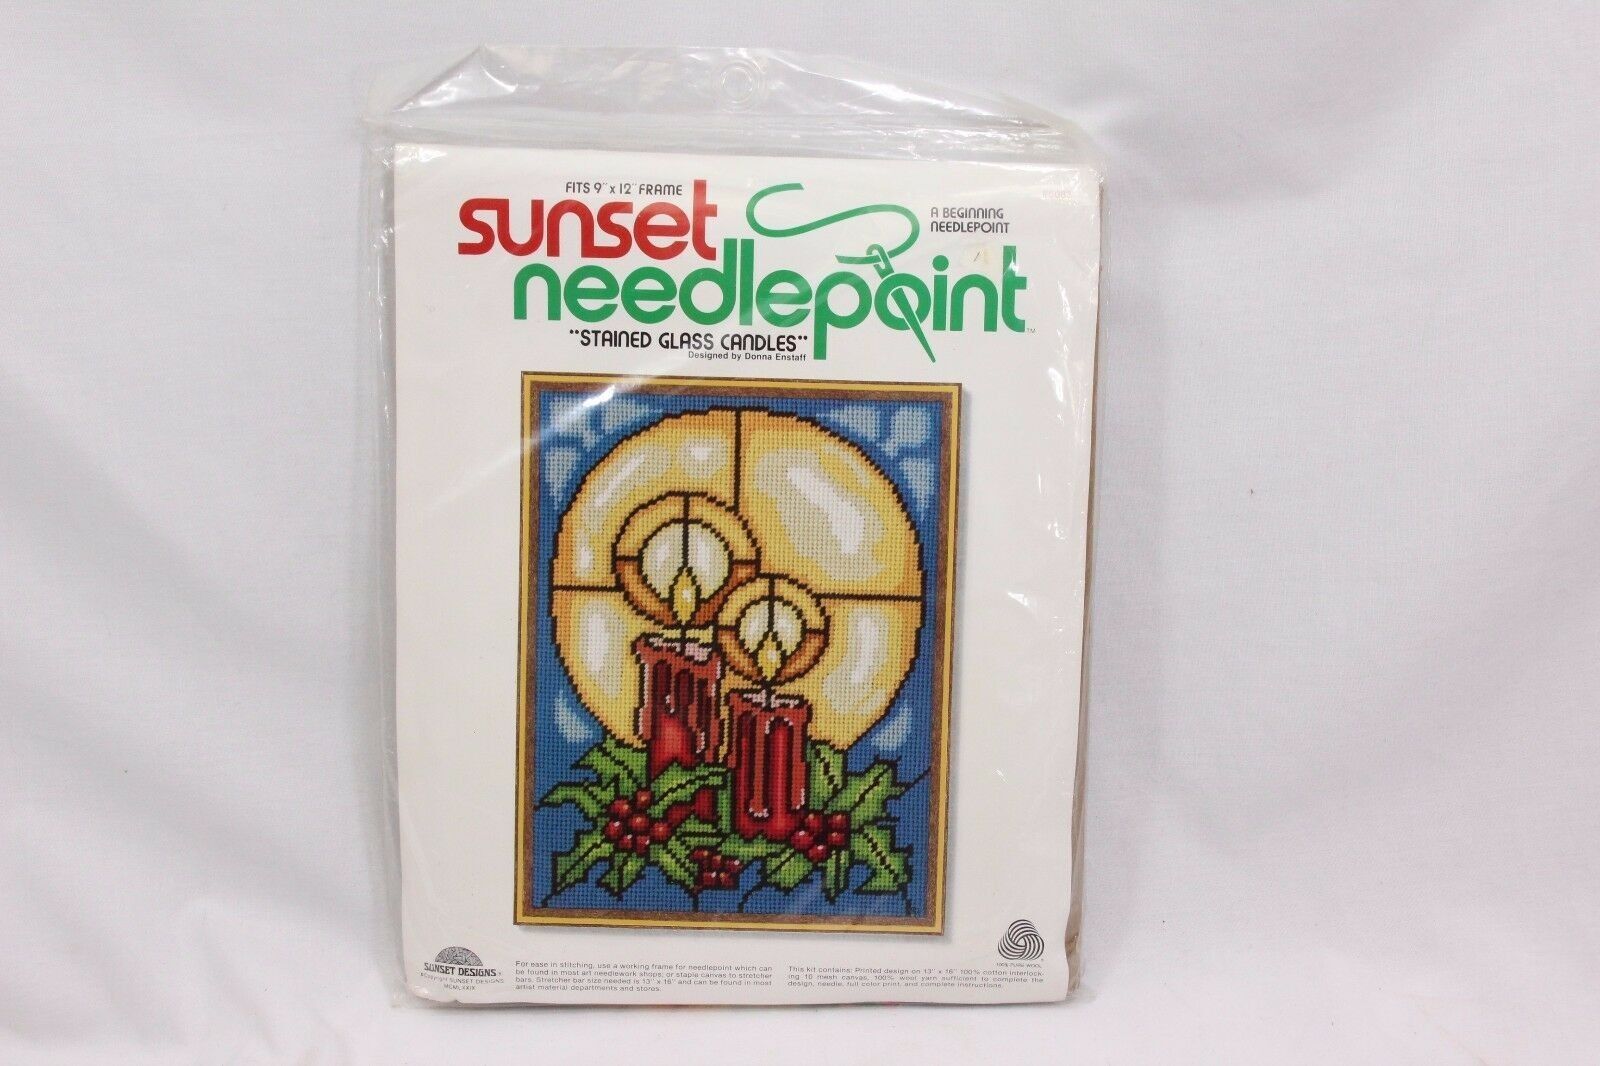 Sunset Xmas Needlepoint Stained Glass Candles 6083 - $29.39